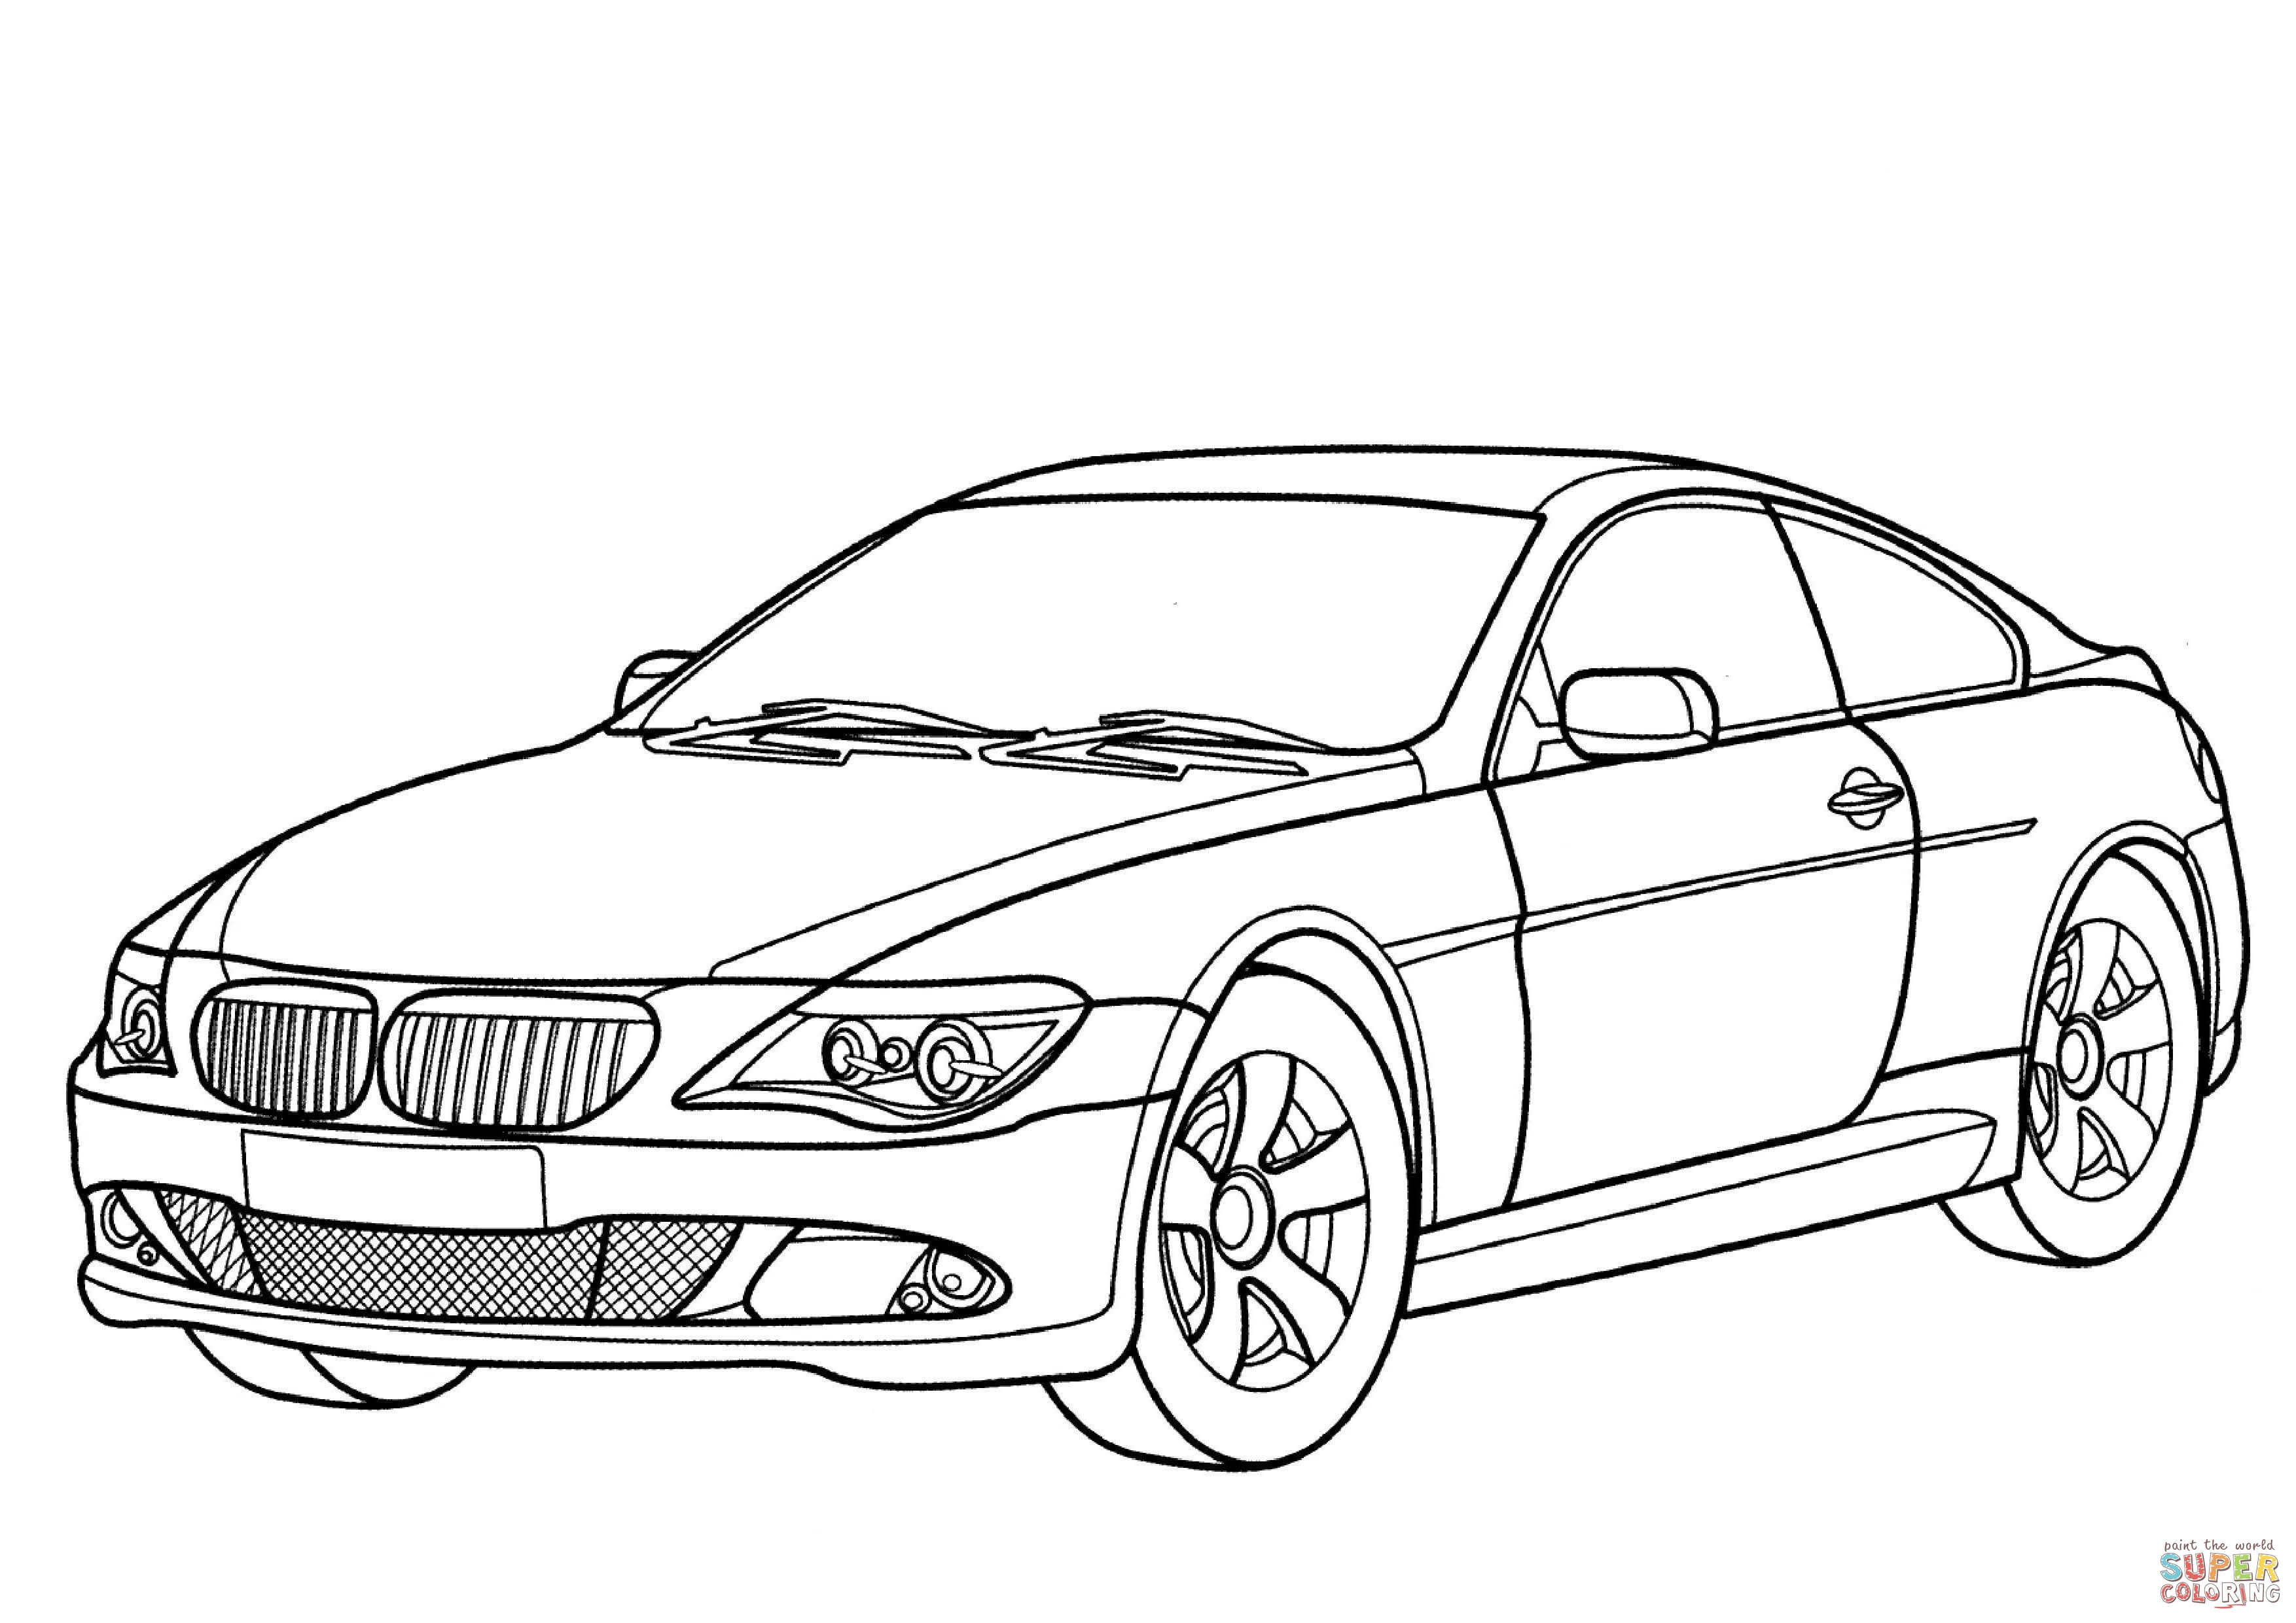 BMW 6 Series coloring page | Free Printable Coloring Pages